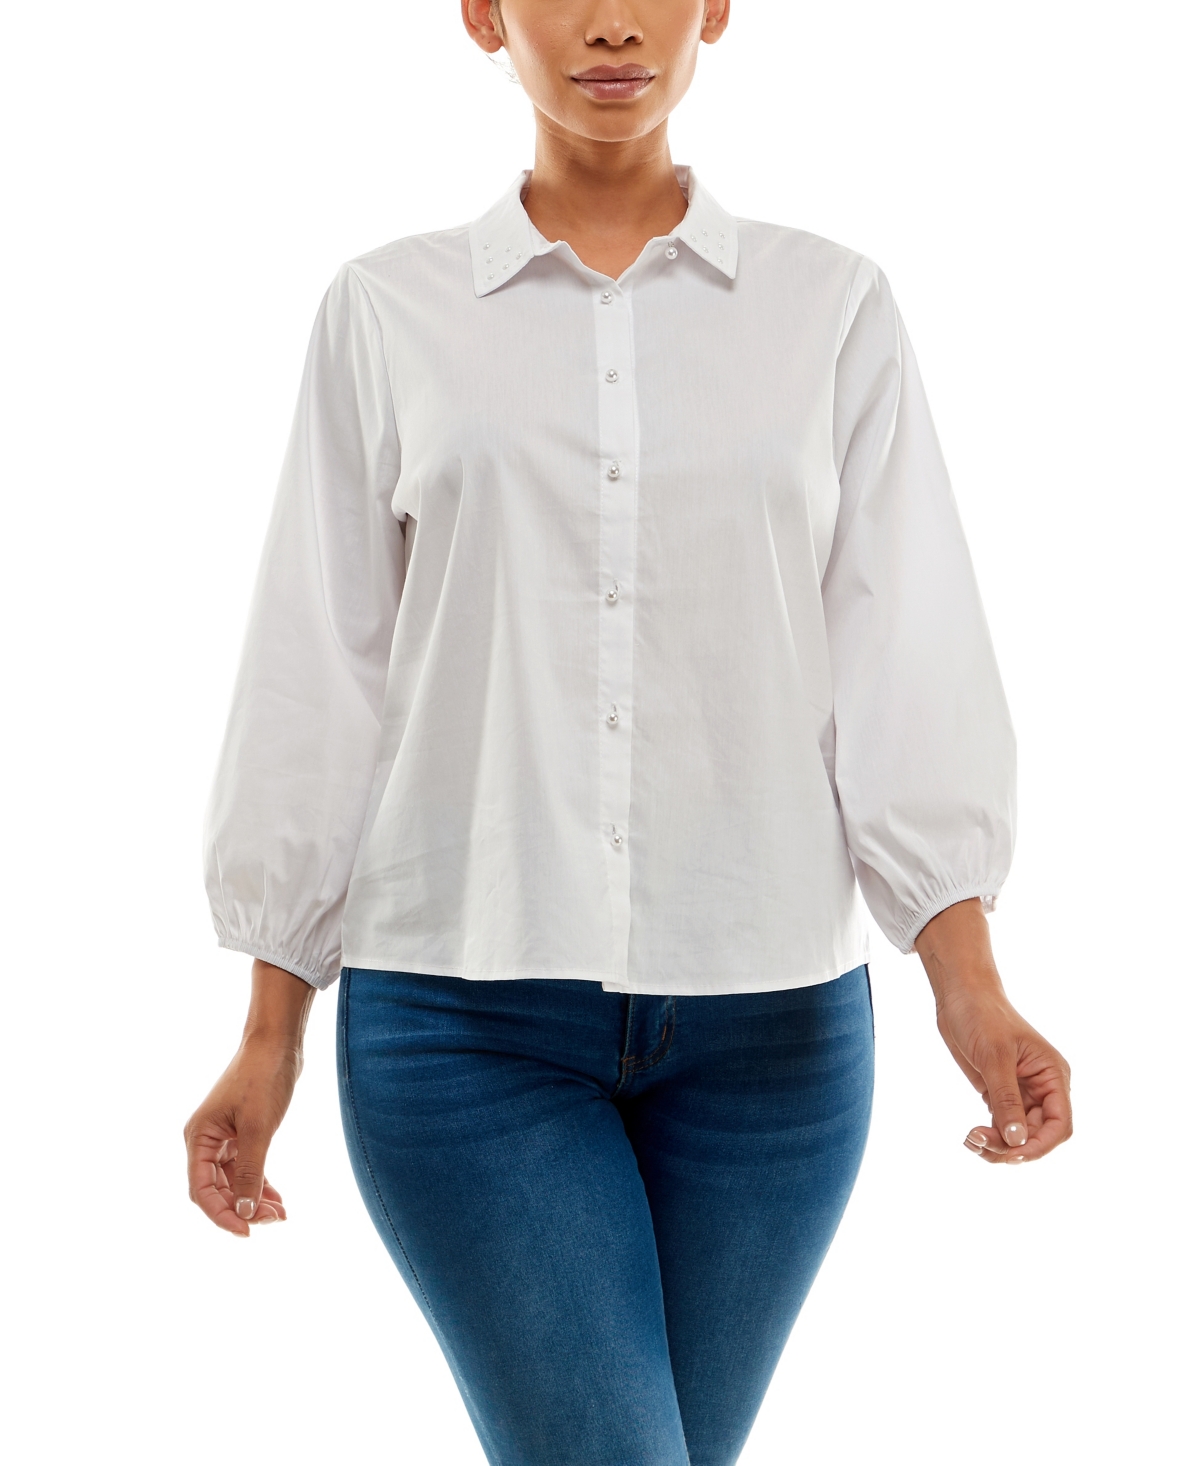 Adrienne Vittadini Women's 3/4 Puff Sleeve Button Front Blouse With Imitation Pearl Collar In Bright White